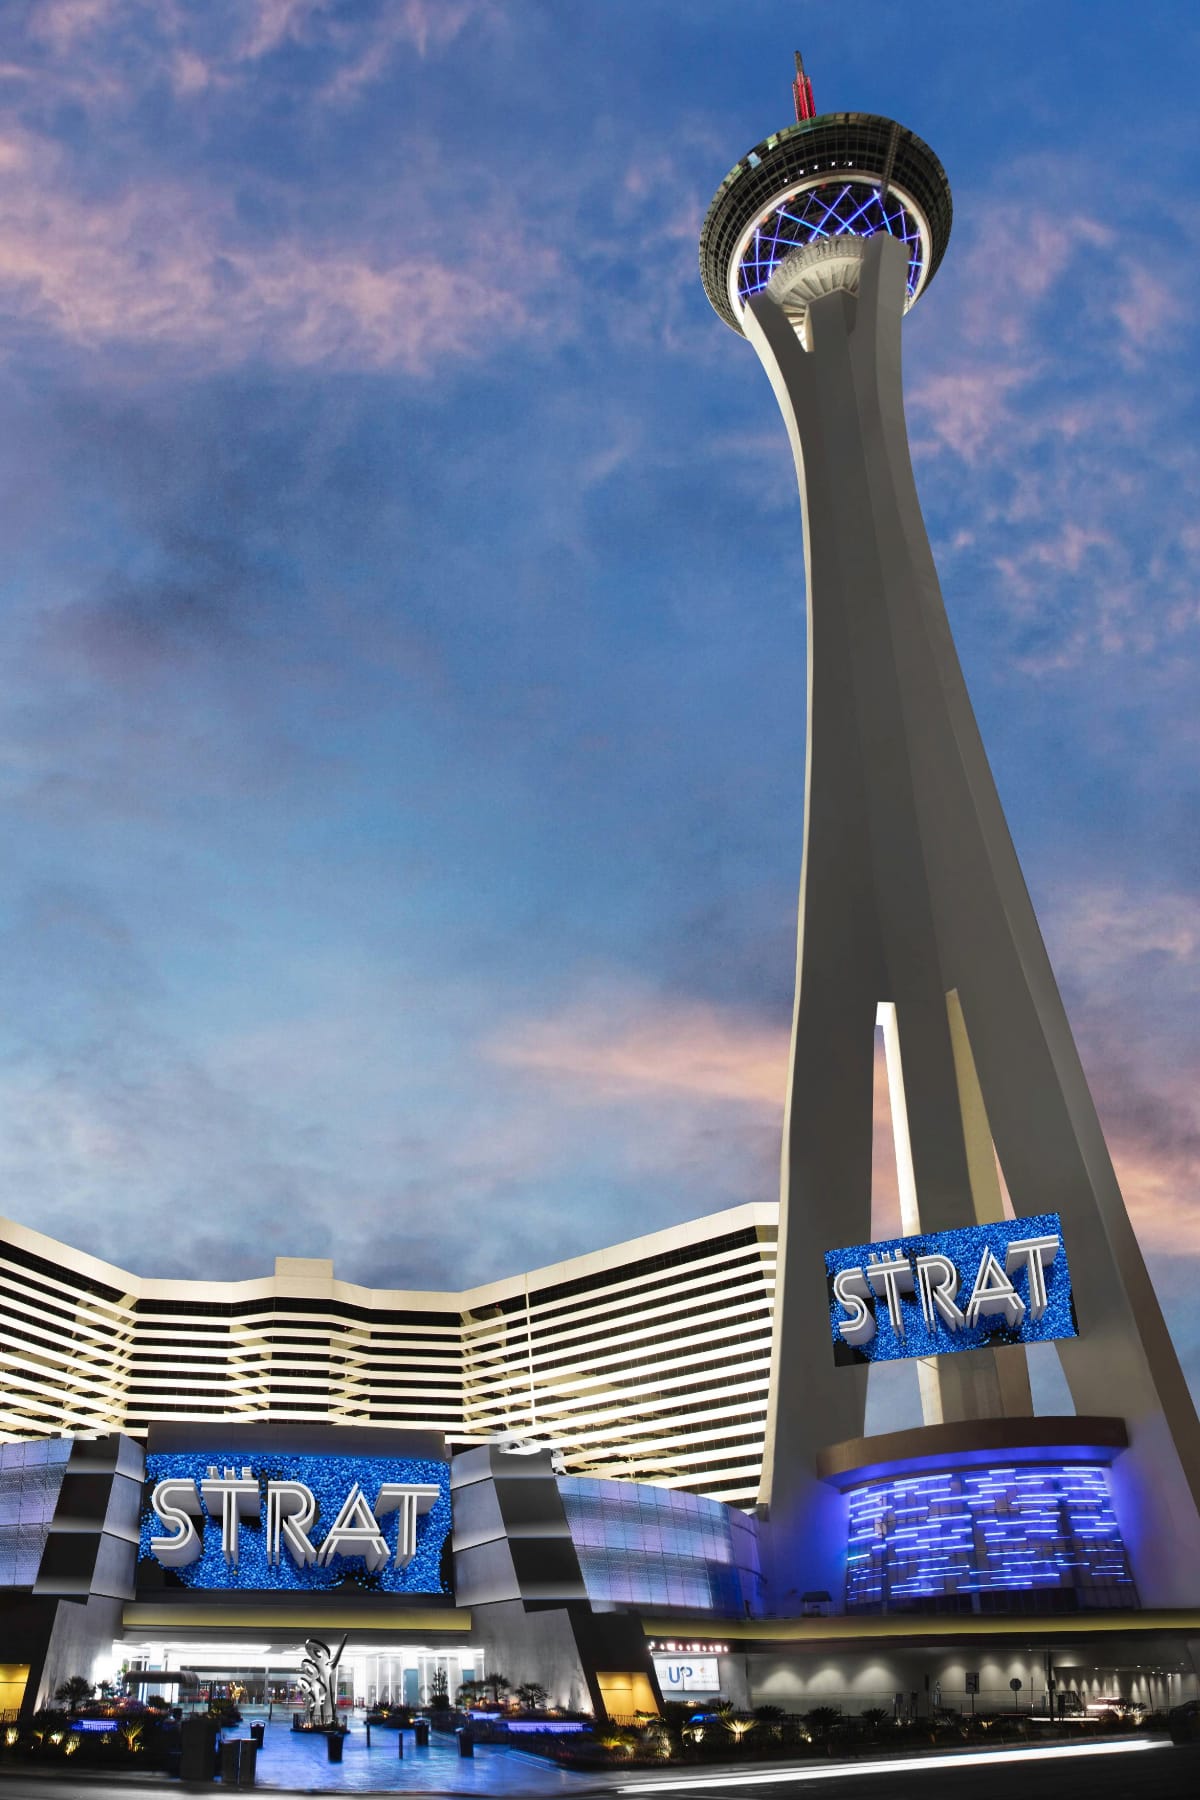 The Strat Las Vegas Tower and Hotel